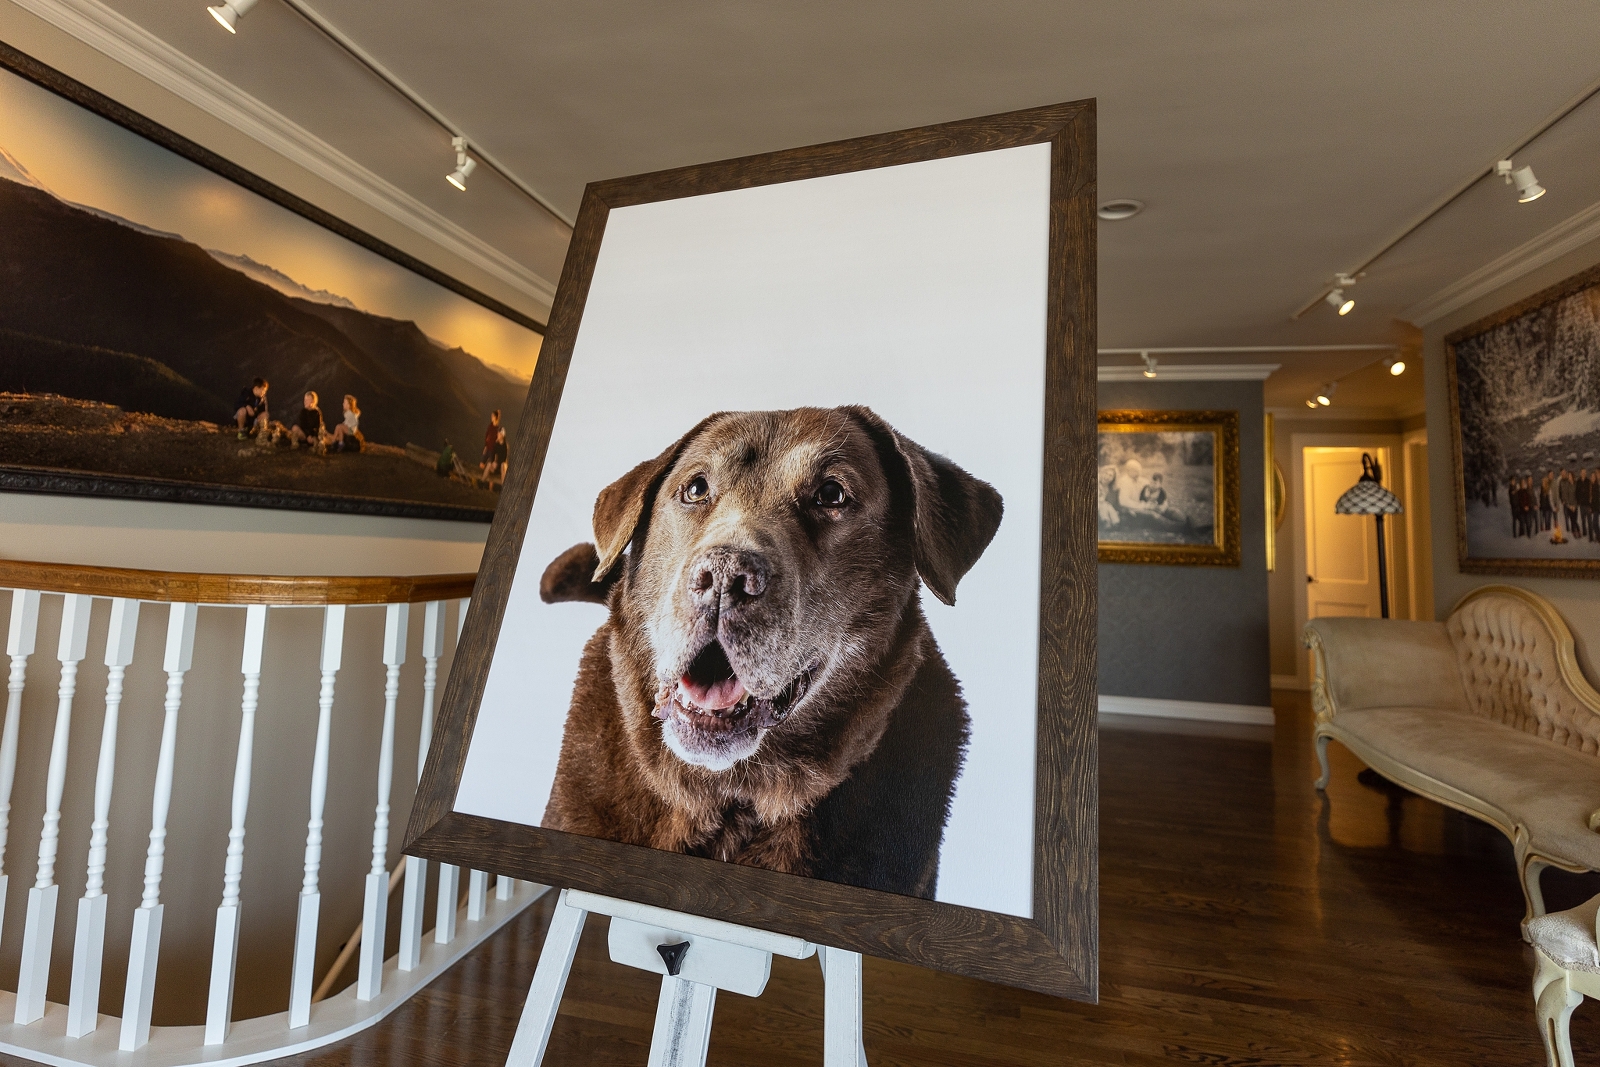 A large framed portrait of a brown dog displayed on an easel in an art gallery.